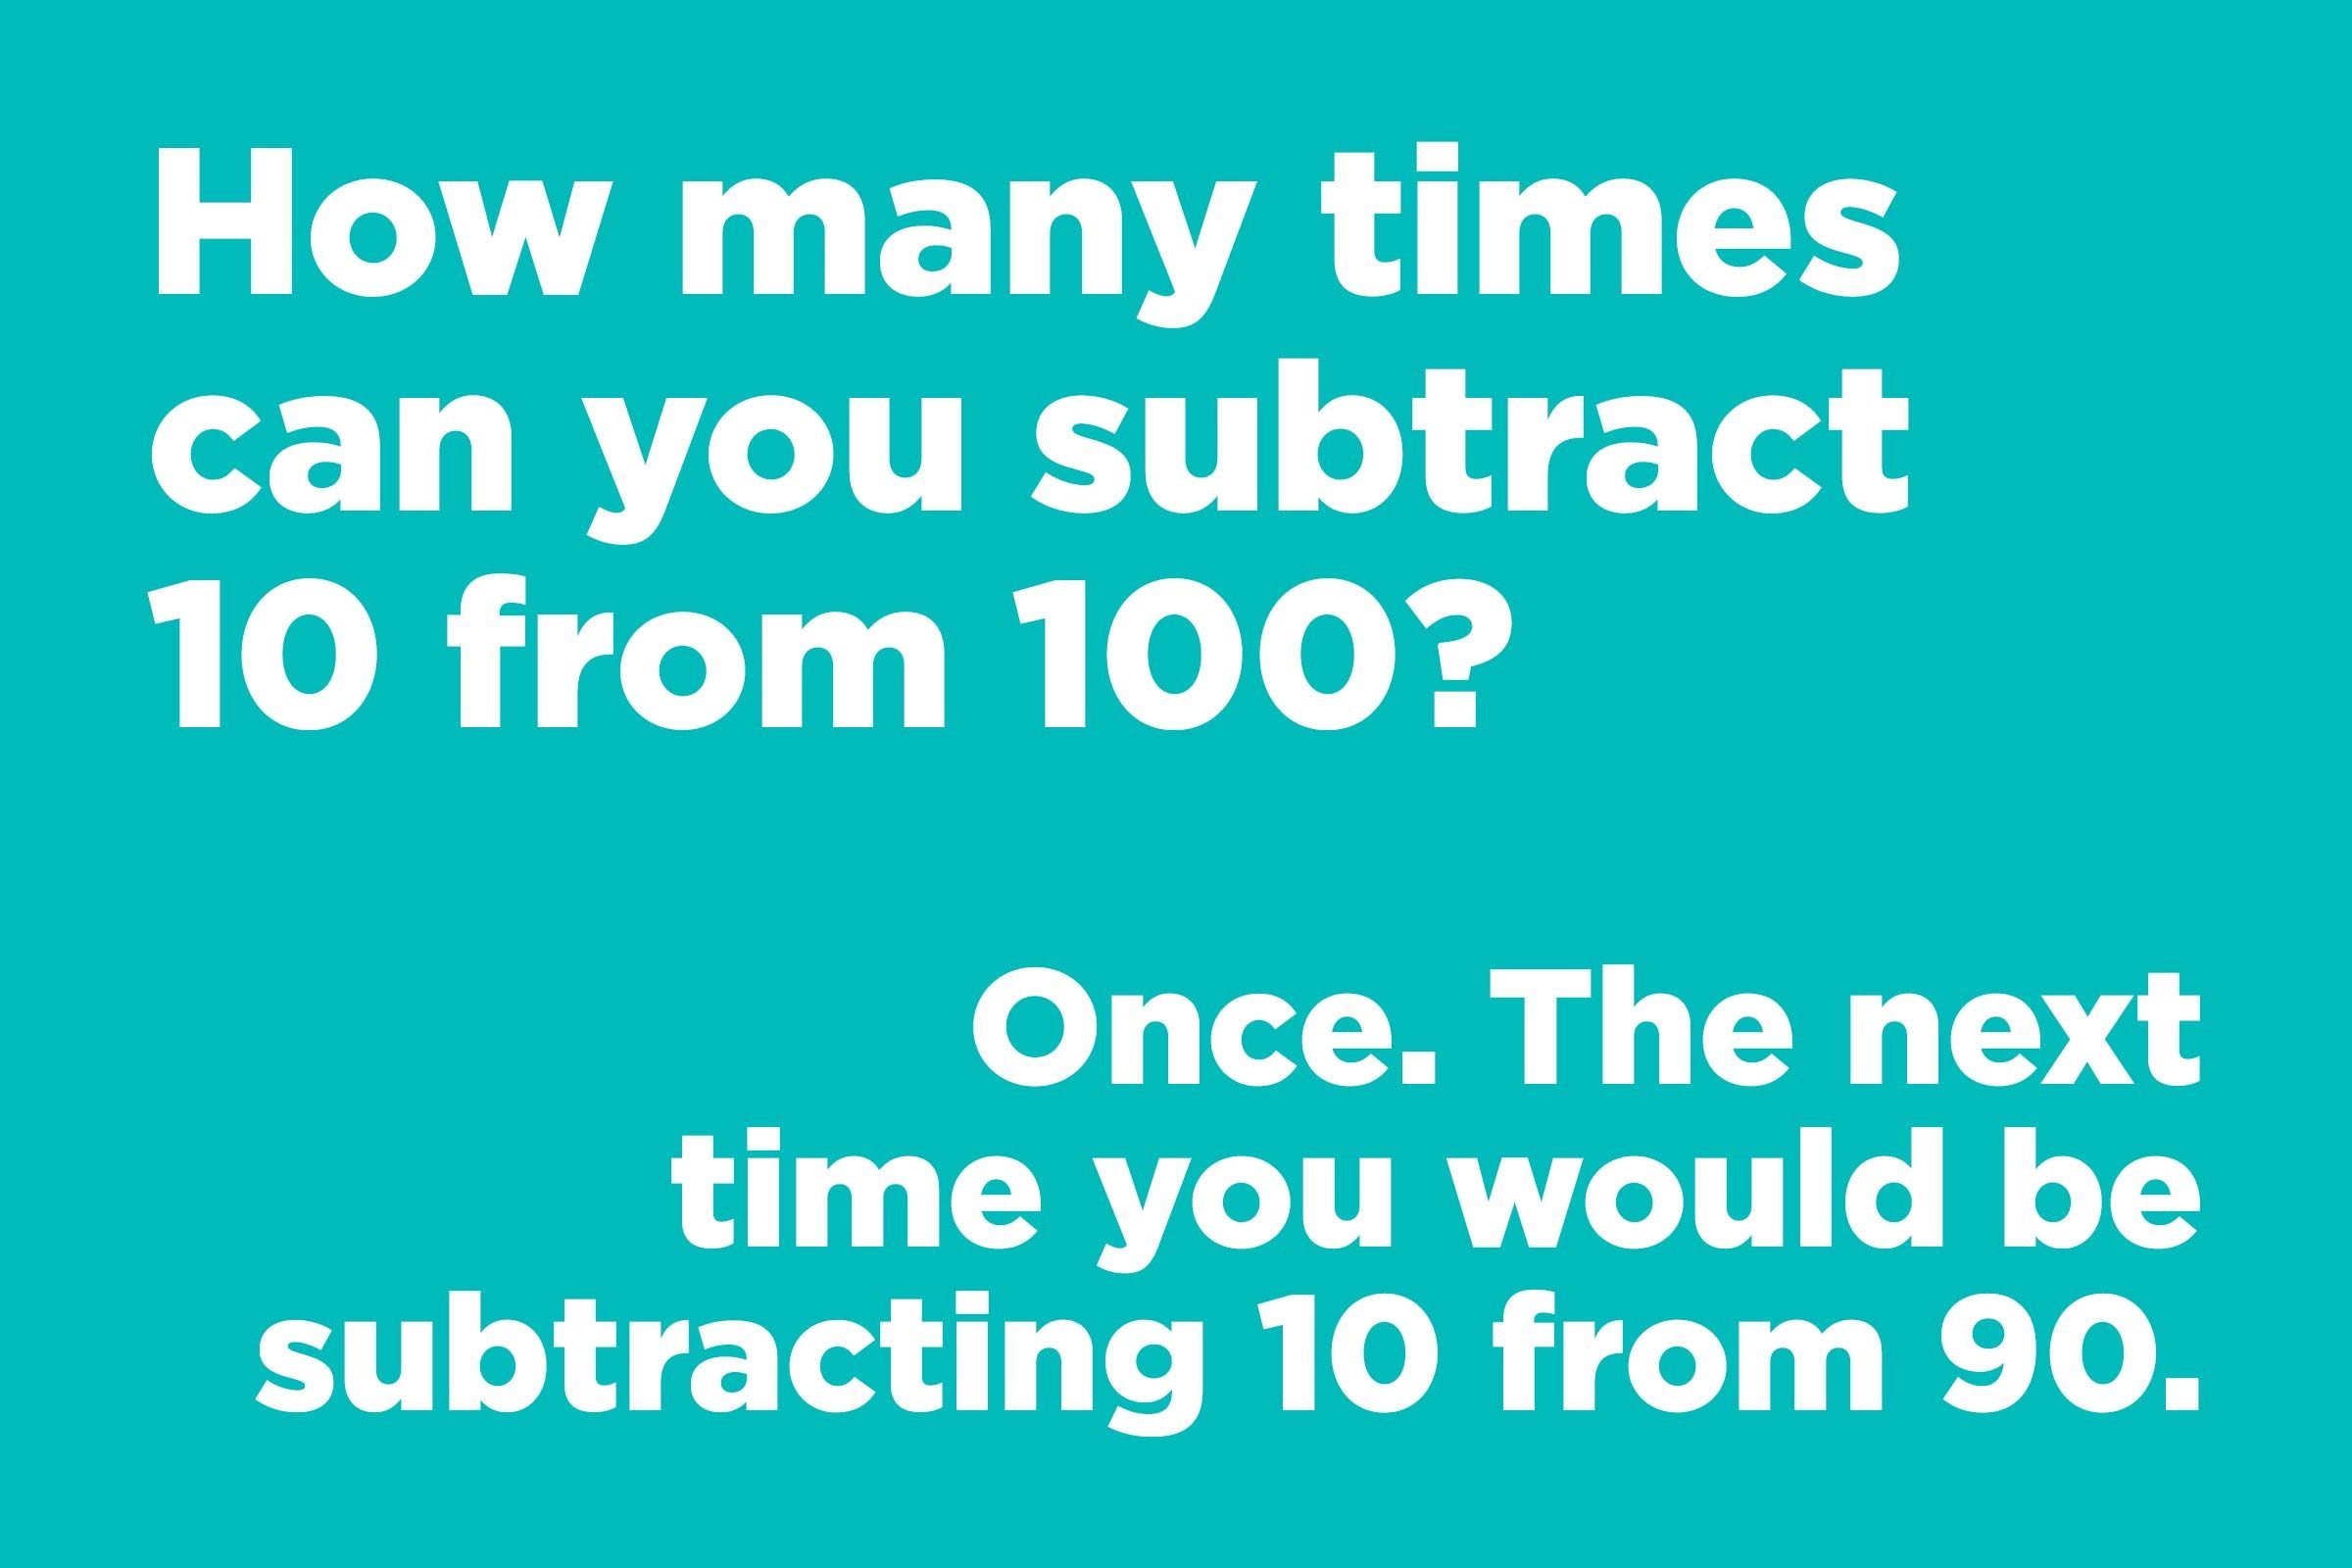 Short jokes - how many times can you subtract 10 from 100? Math joke